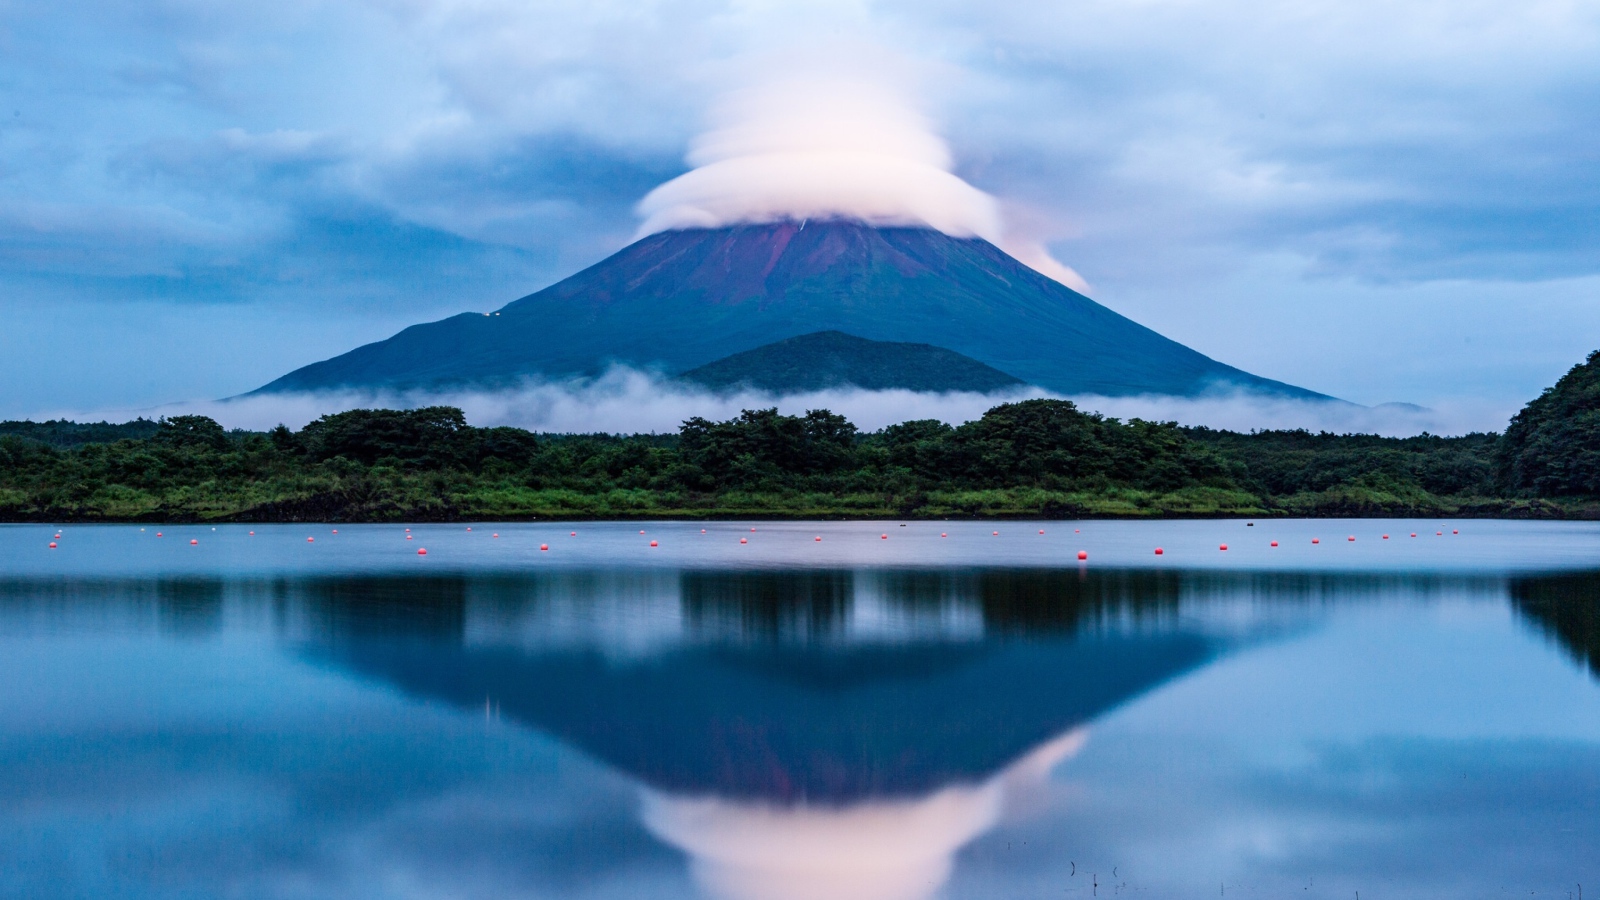 The Fuji volcano in white clouds is reflected in the lake water